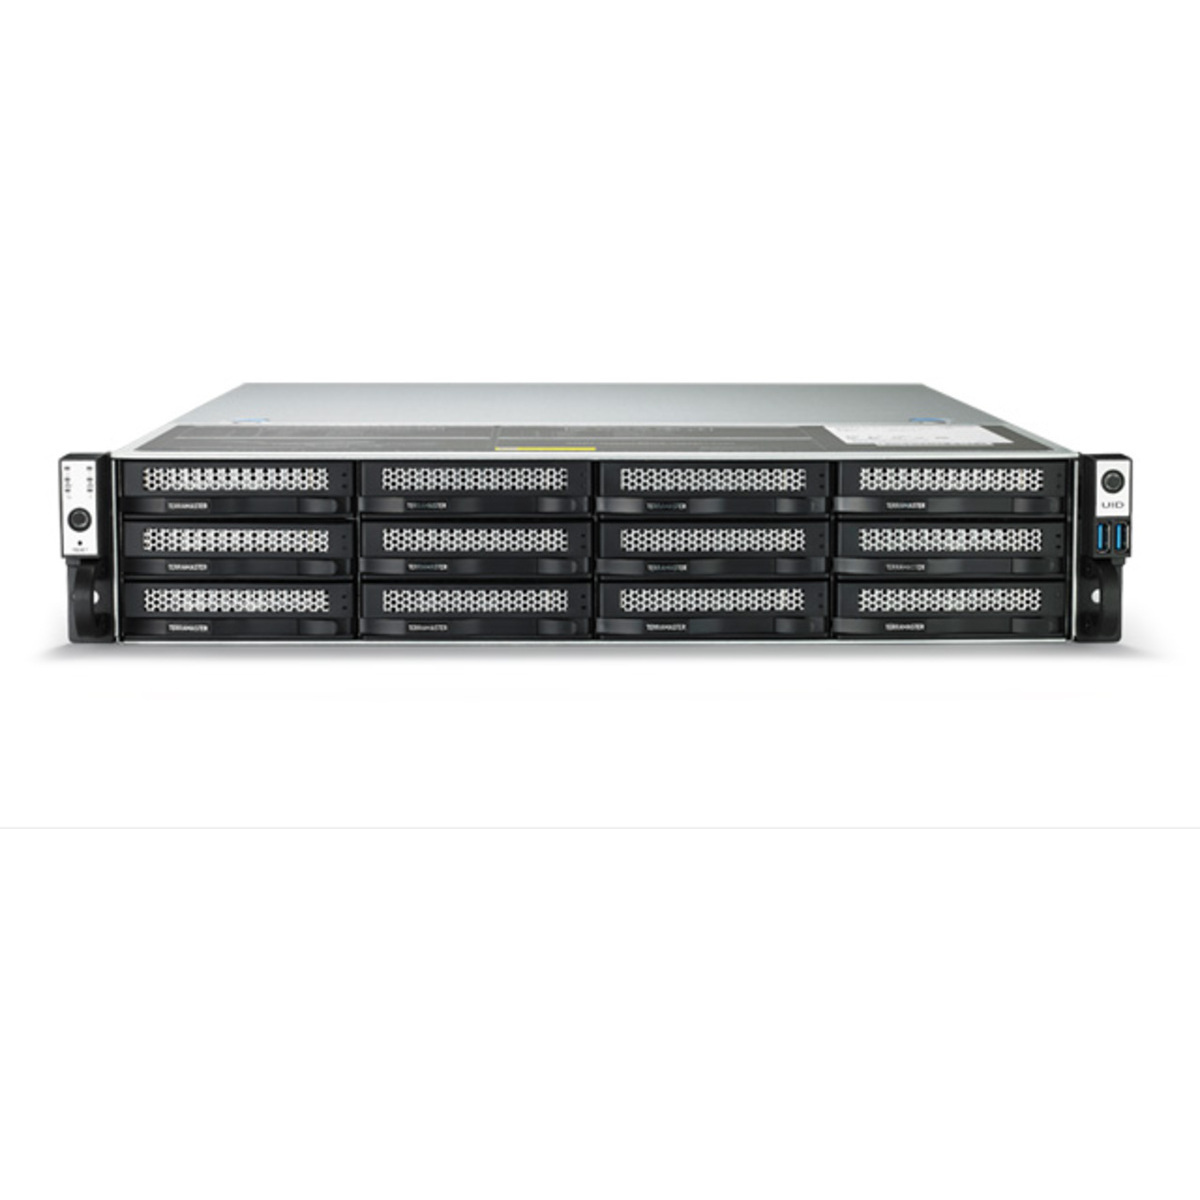 TerraMaster U12-722-2224 240tb 12-Bay RackMount Large Business / Enterprise NAS - Network Attached Storage Device 10x24tb Seagate IronWolf Pro ST24000NT002 3.5 7200rpm SATA 6Gb/s HDD NAS Class Drives Installed - Burn-In Tested U12-722-2224